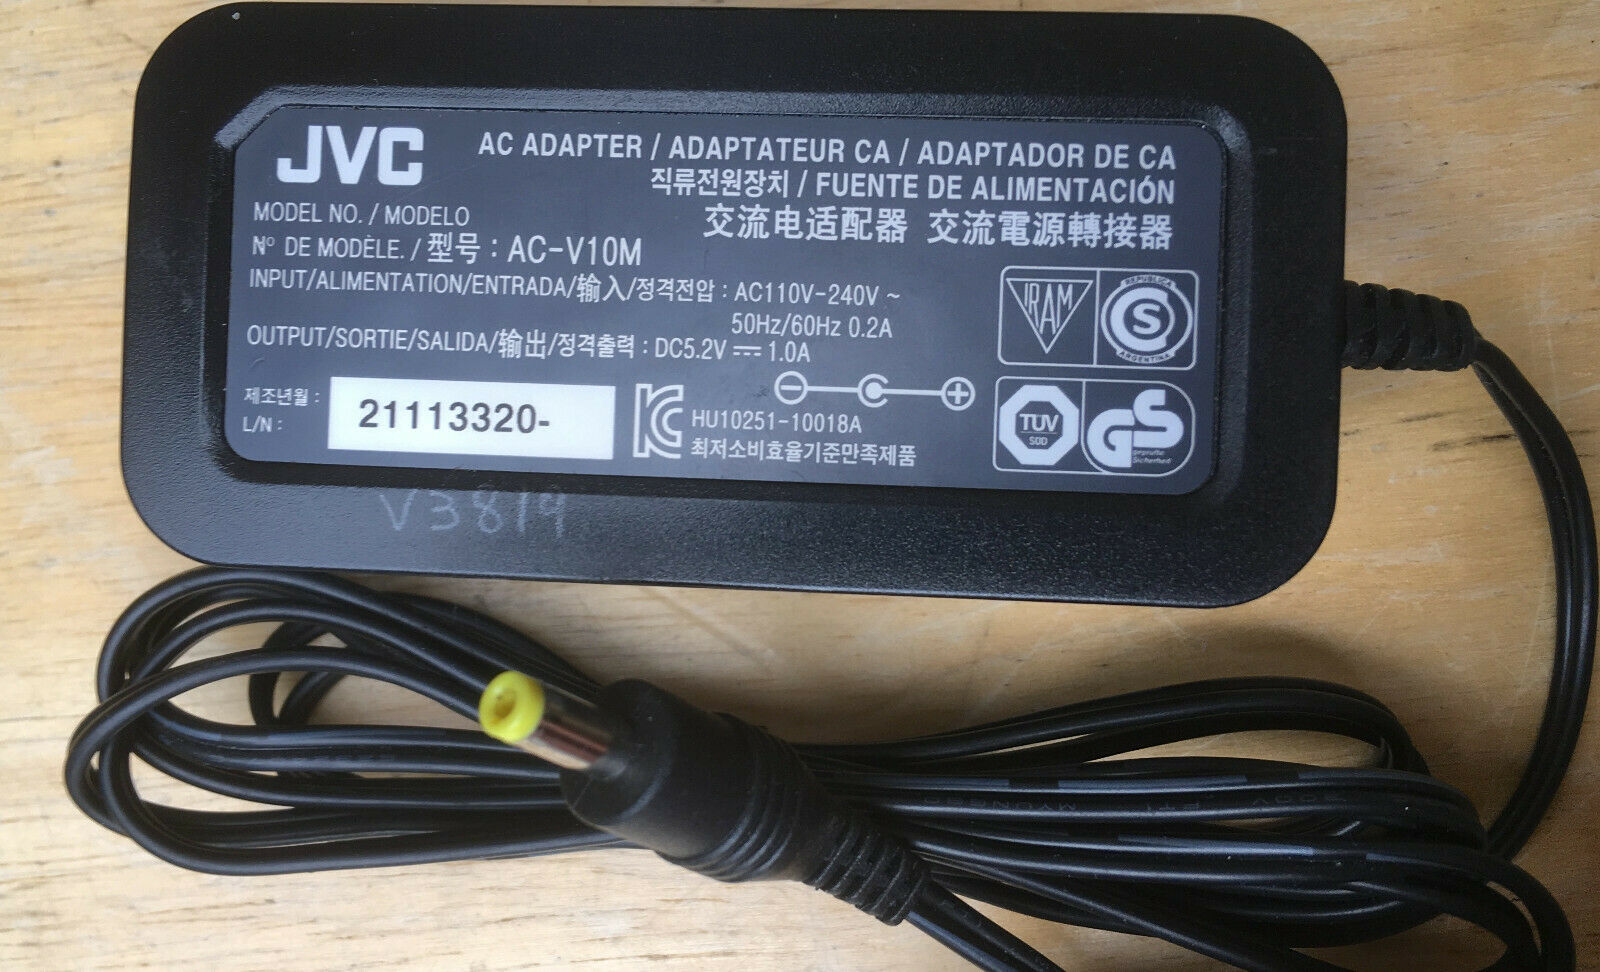 New JVC 5.2v 1A AC-V10M AC-V10 AC-V10U Adapter for JVC Everio Camcorders GZ-HM445 - Click Image to Close